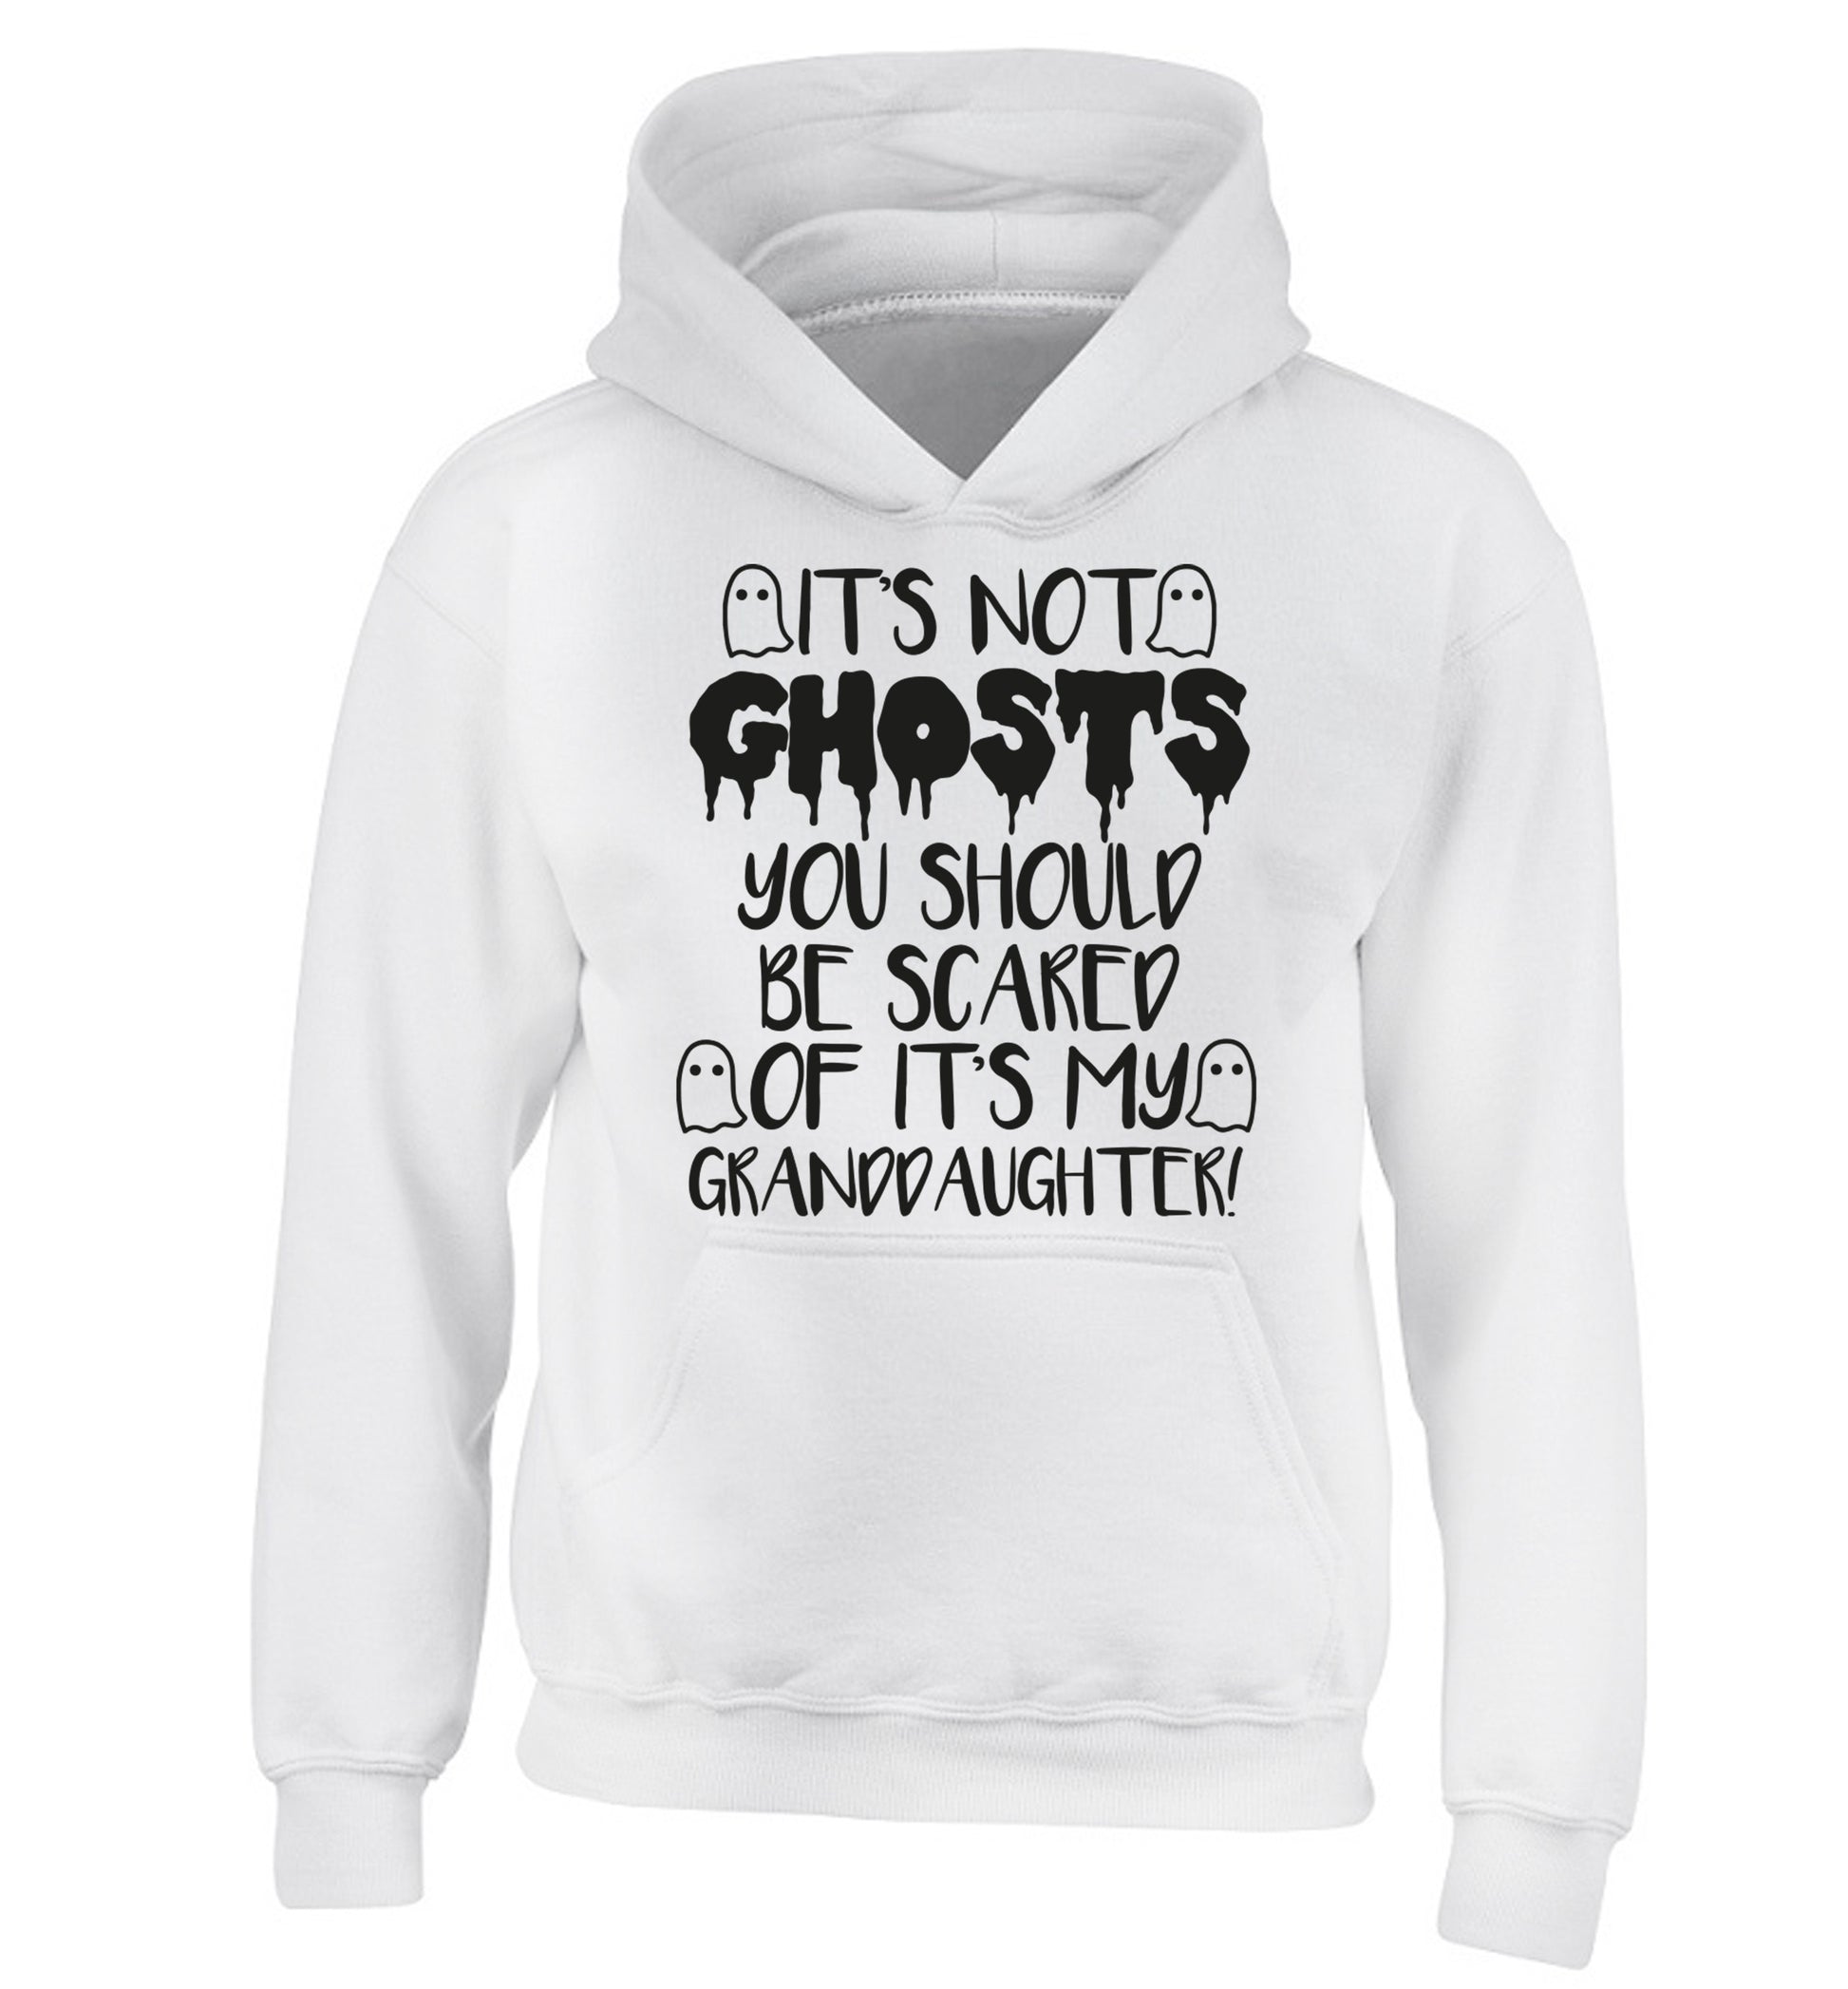 It's not ghosts you should be scared of it's my granddaughter! children's white hoodie 12-14 Years